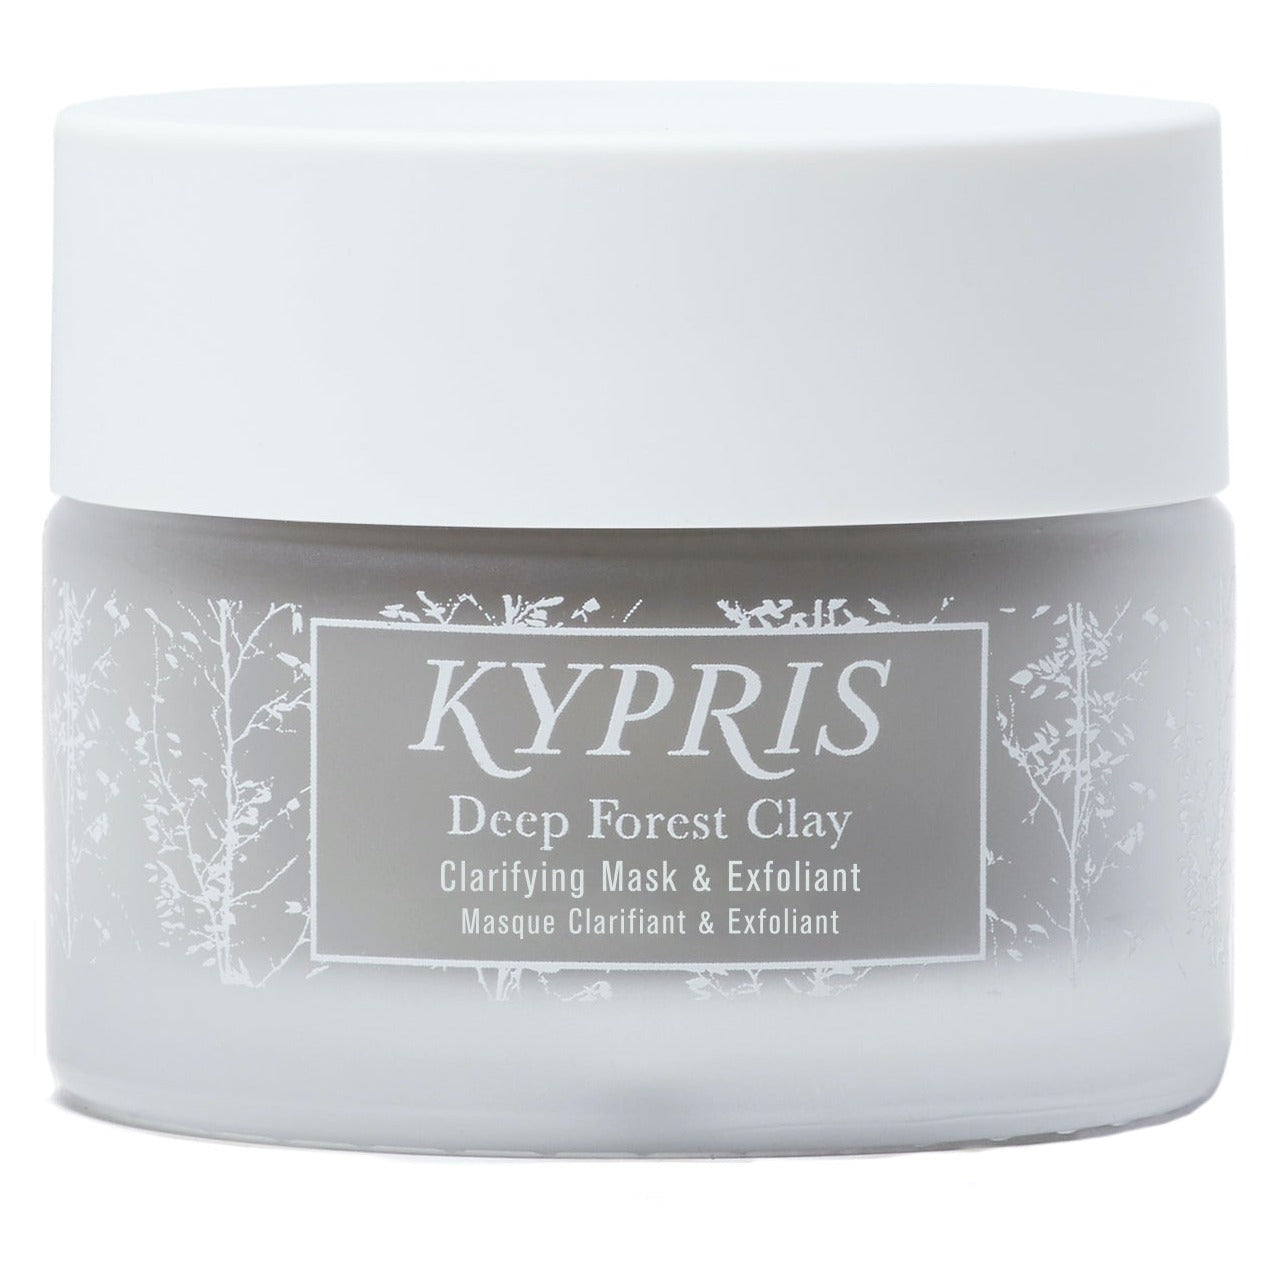 Deep Forest Clay Mask